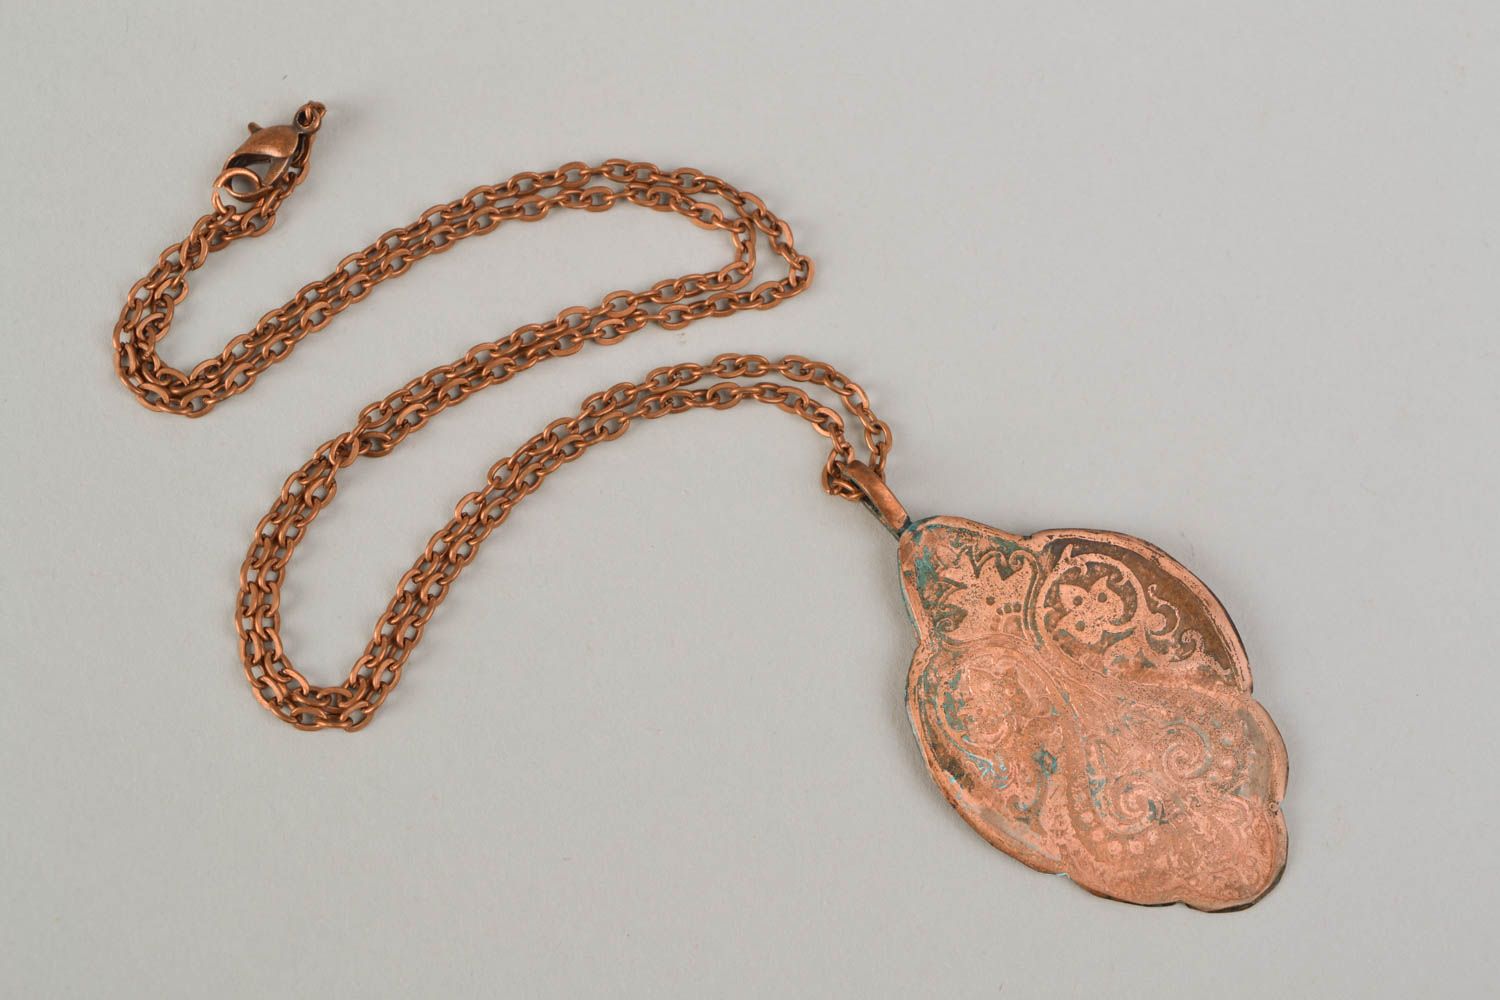 Copper pendant on long chain created using patina coating and etching techniques photo 5